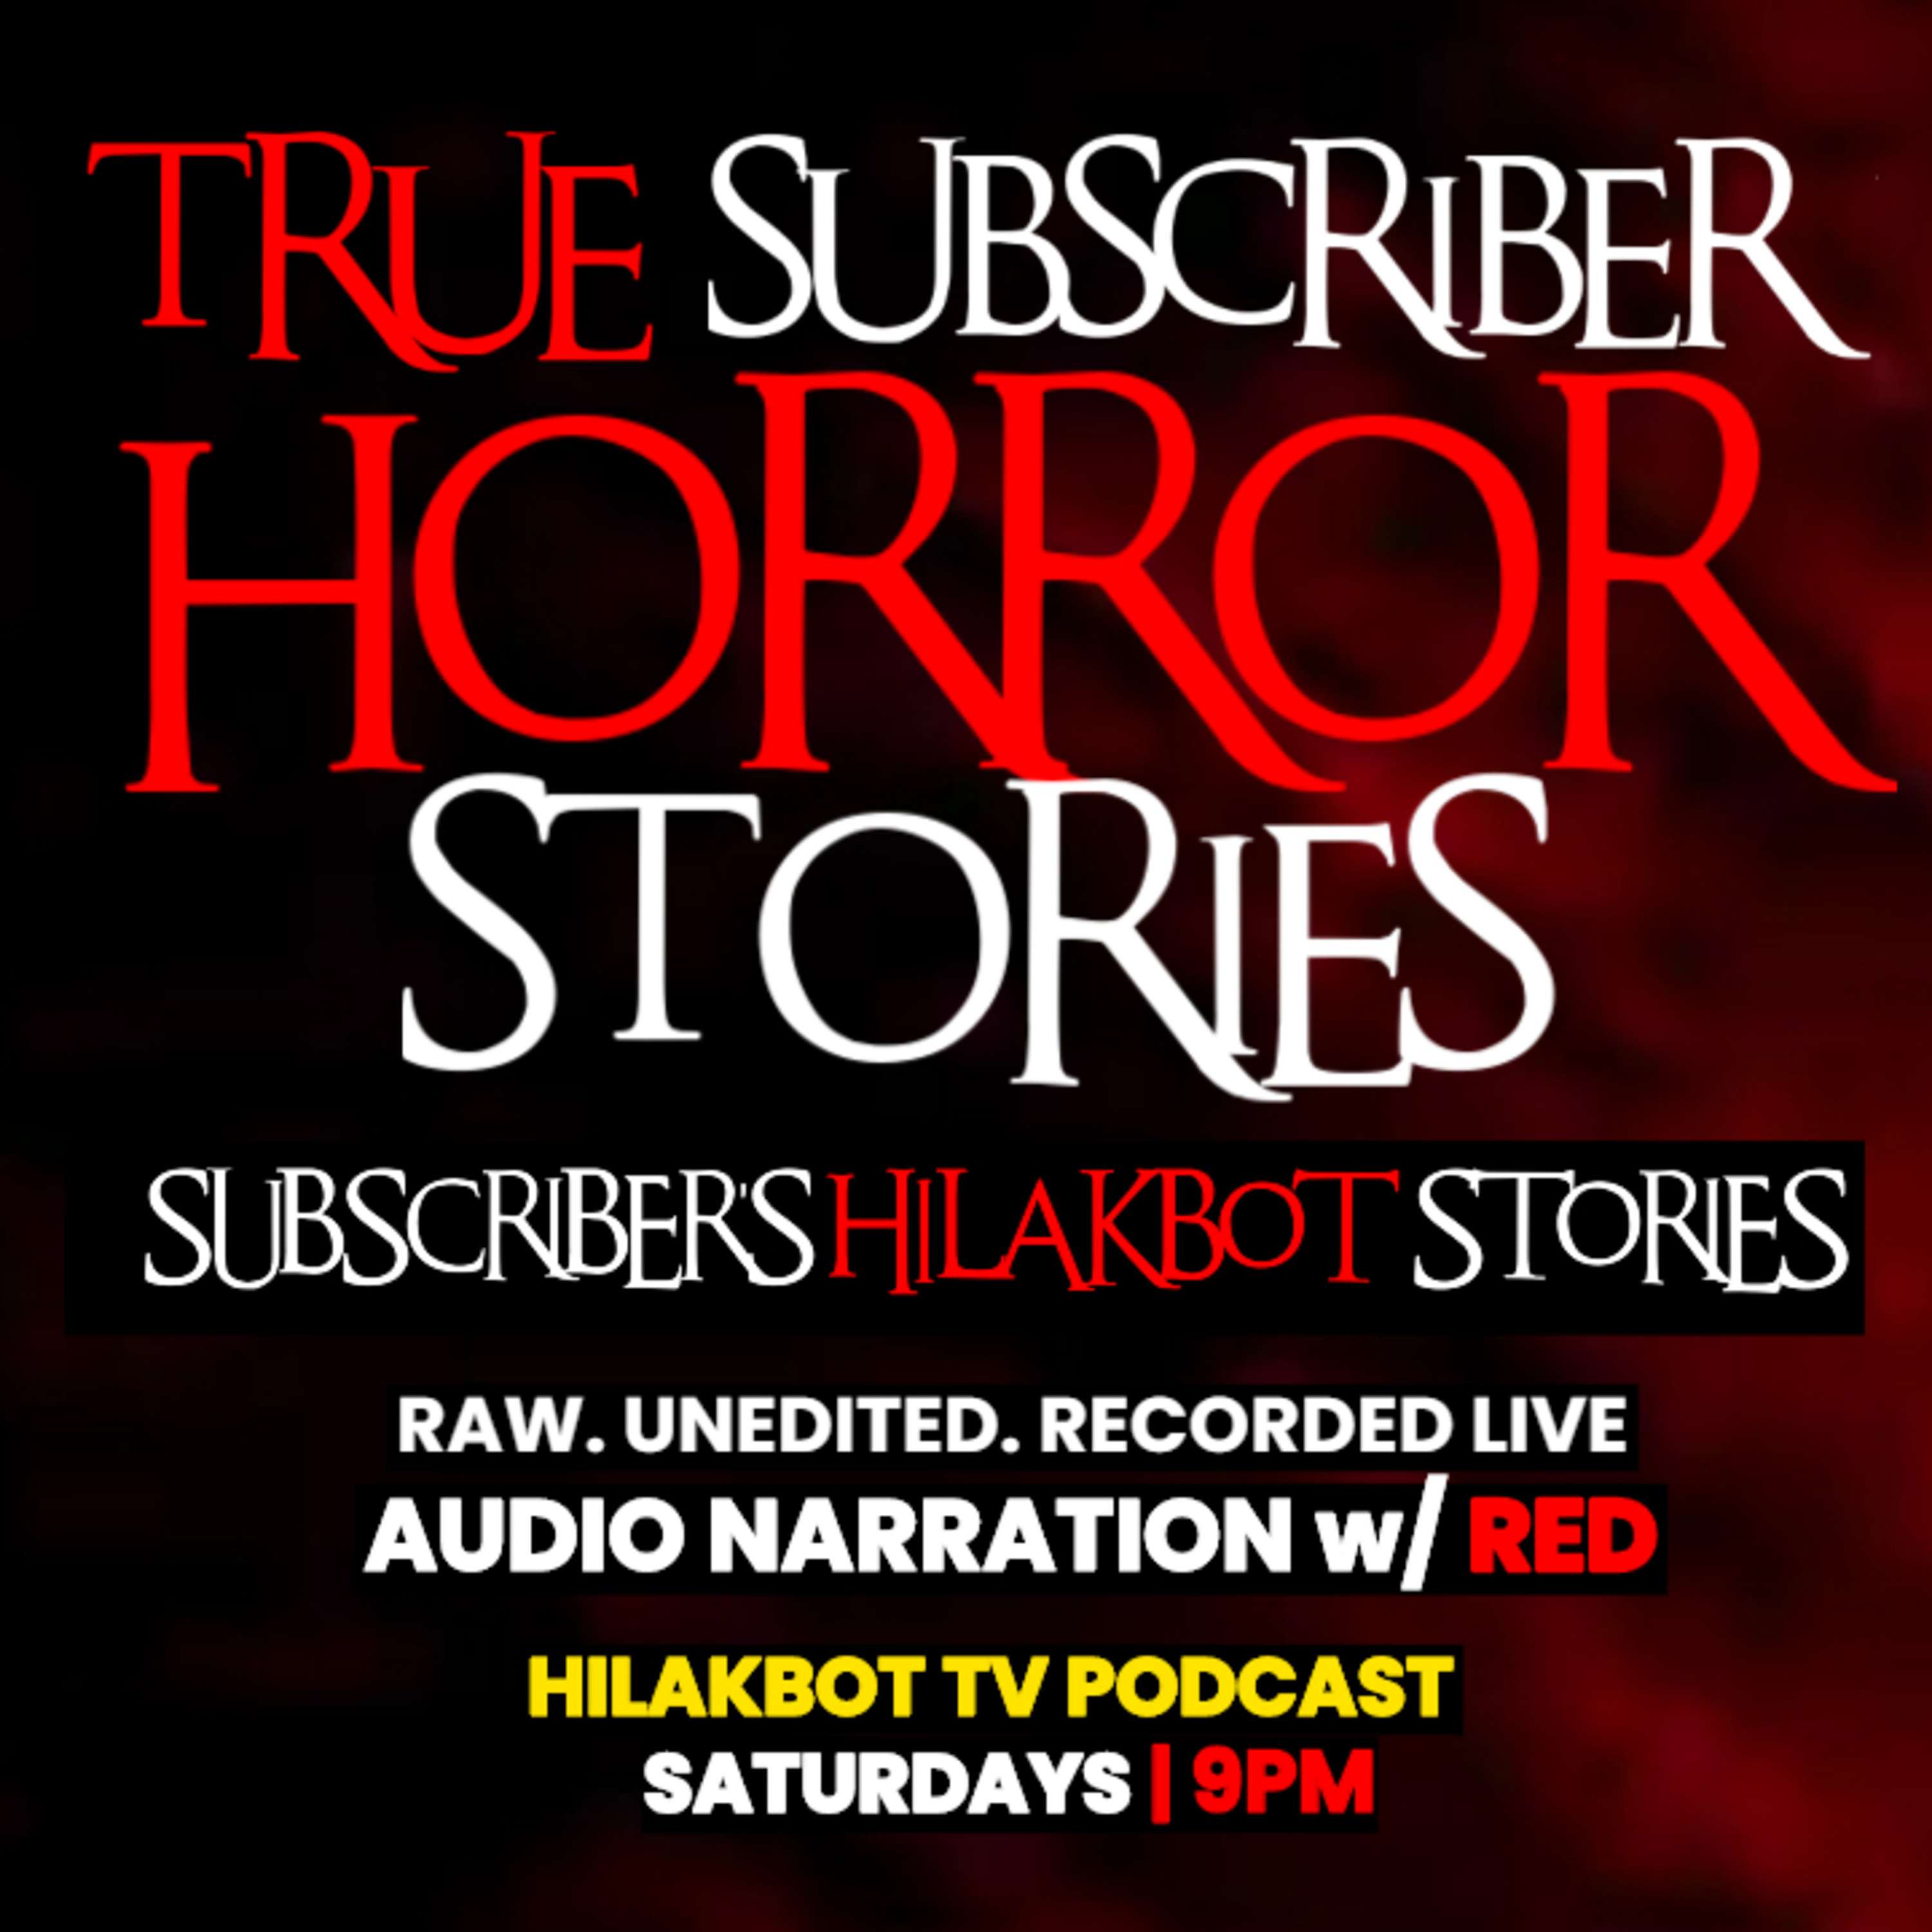 SUBSCRIBER'S HILAKBOT STORIES EPISODE 10 - Live Narration w/ RED | Listener's Submitted True Scary Stories